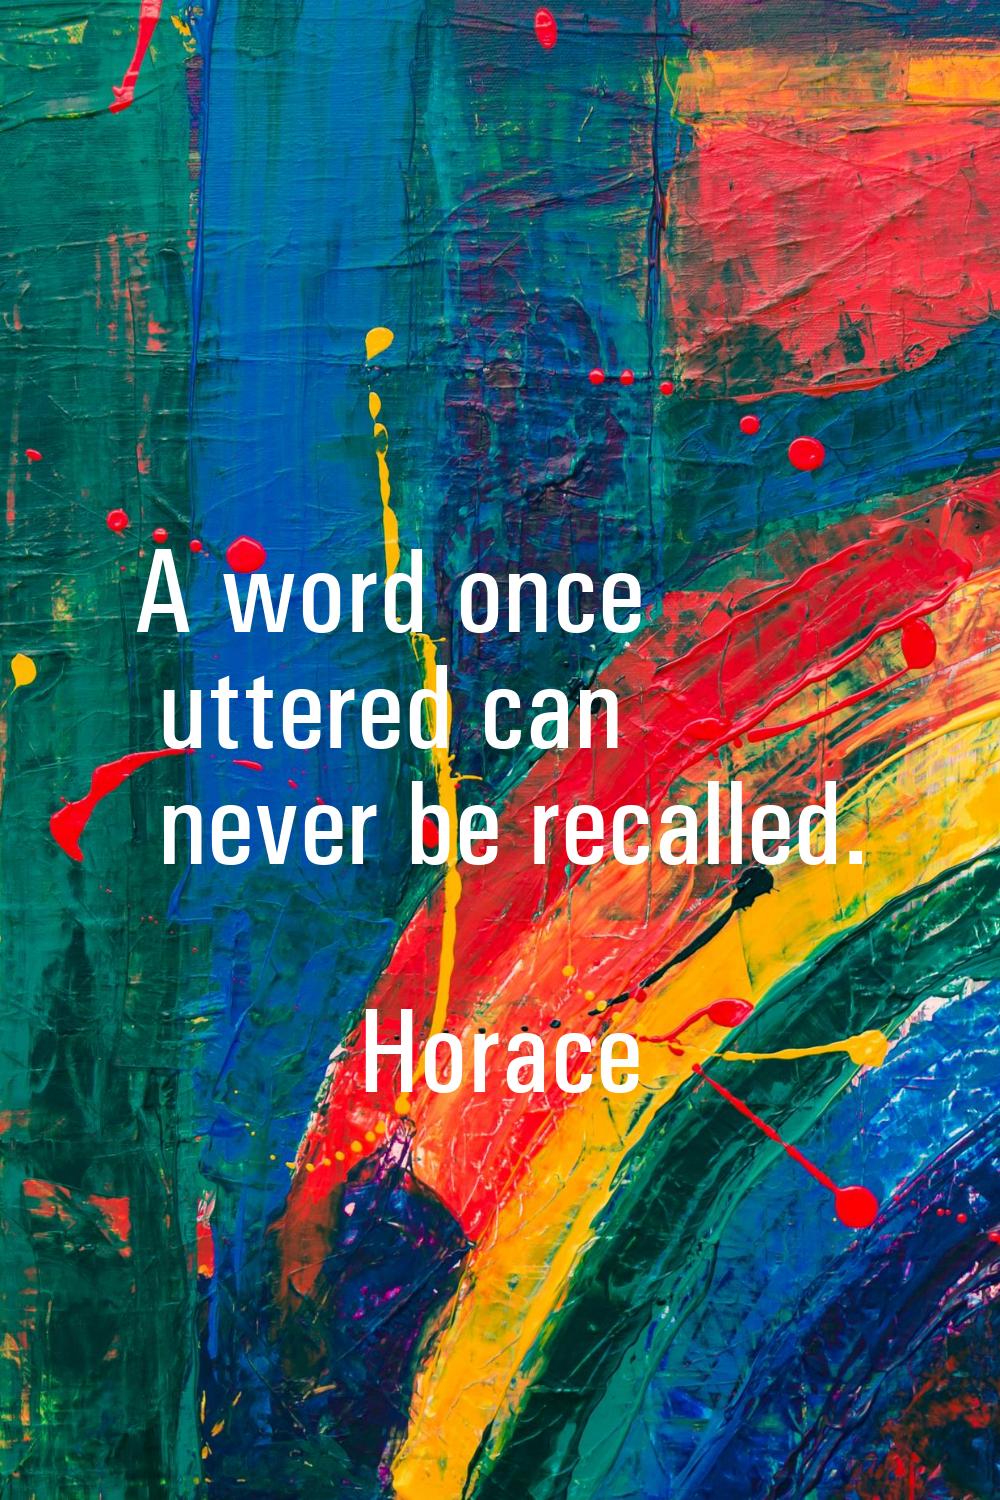 A word once uttered can never be recalled.